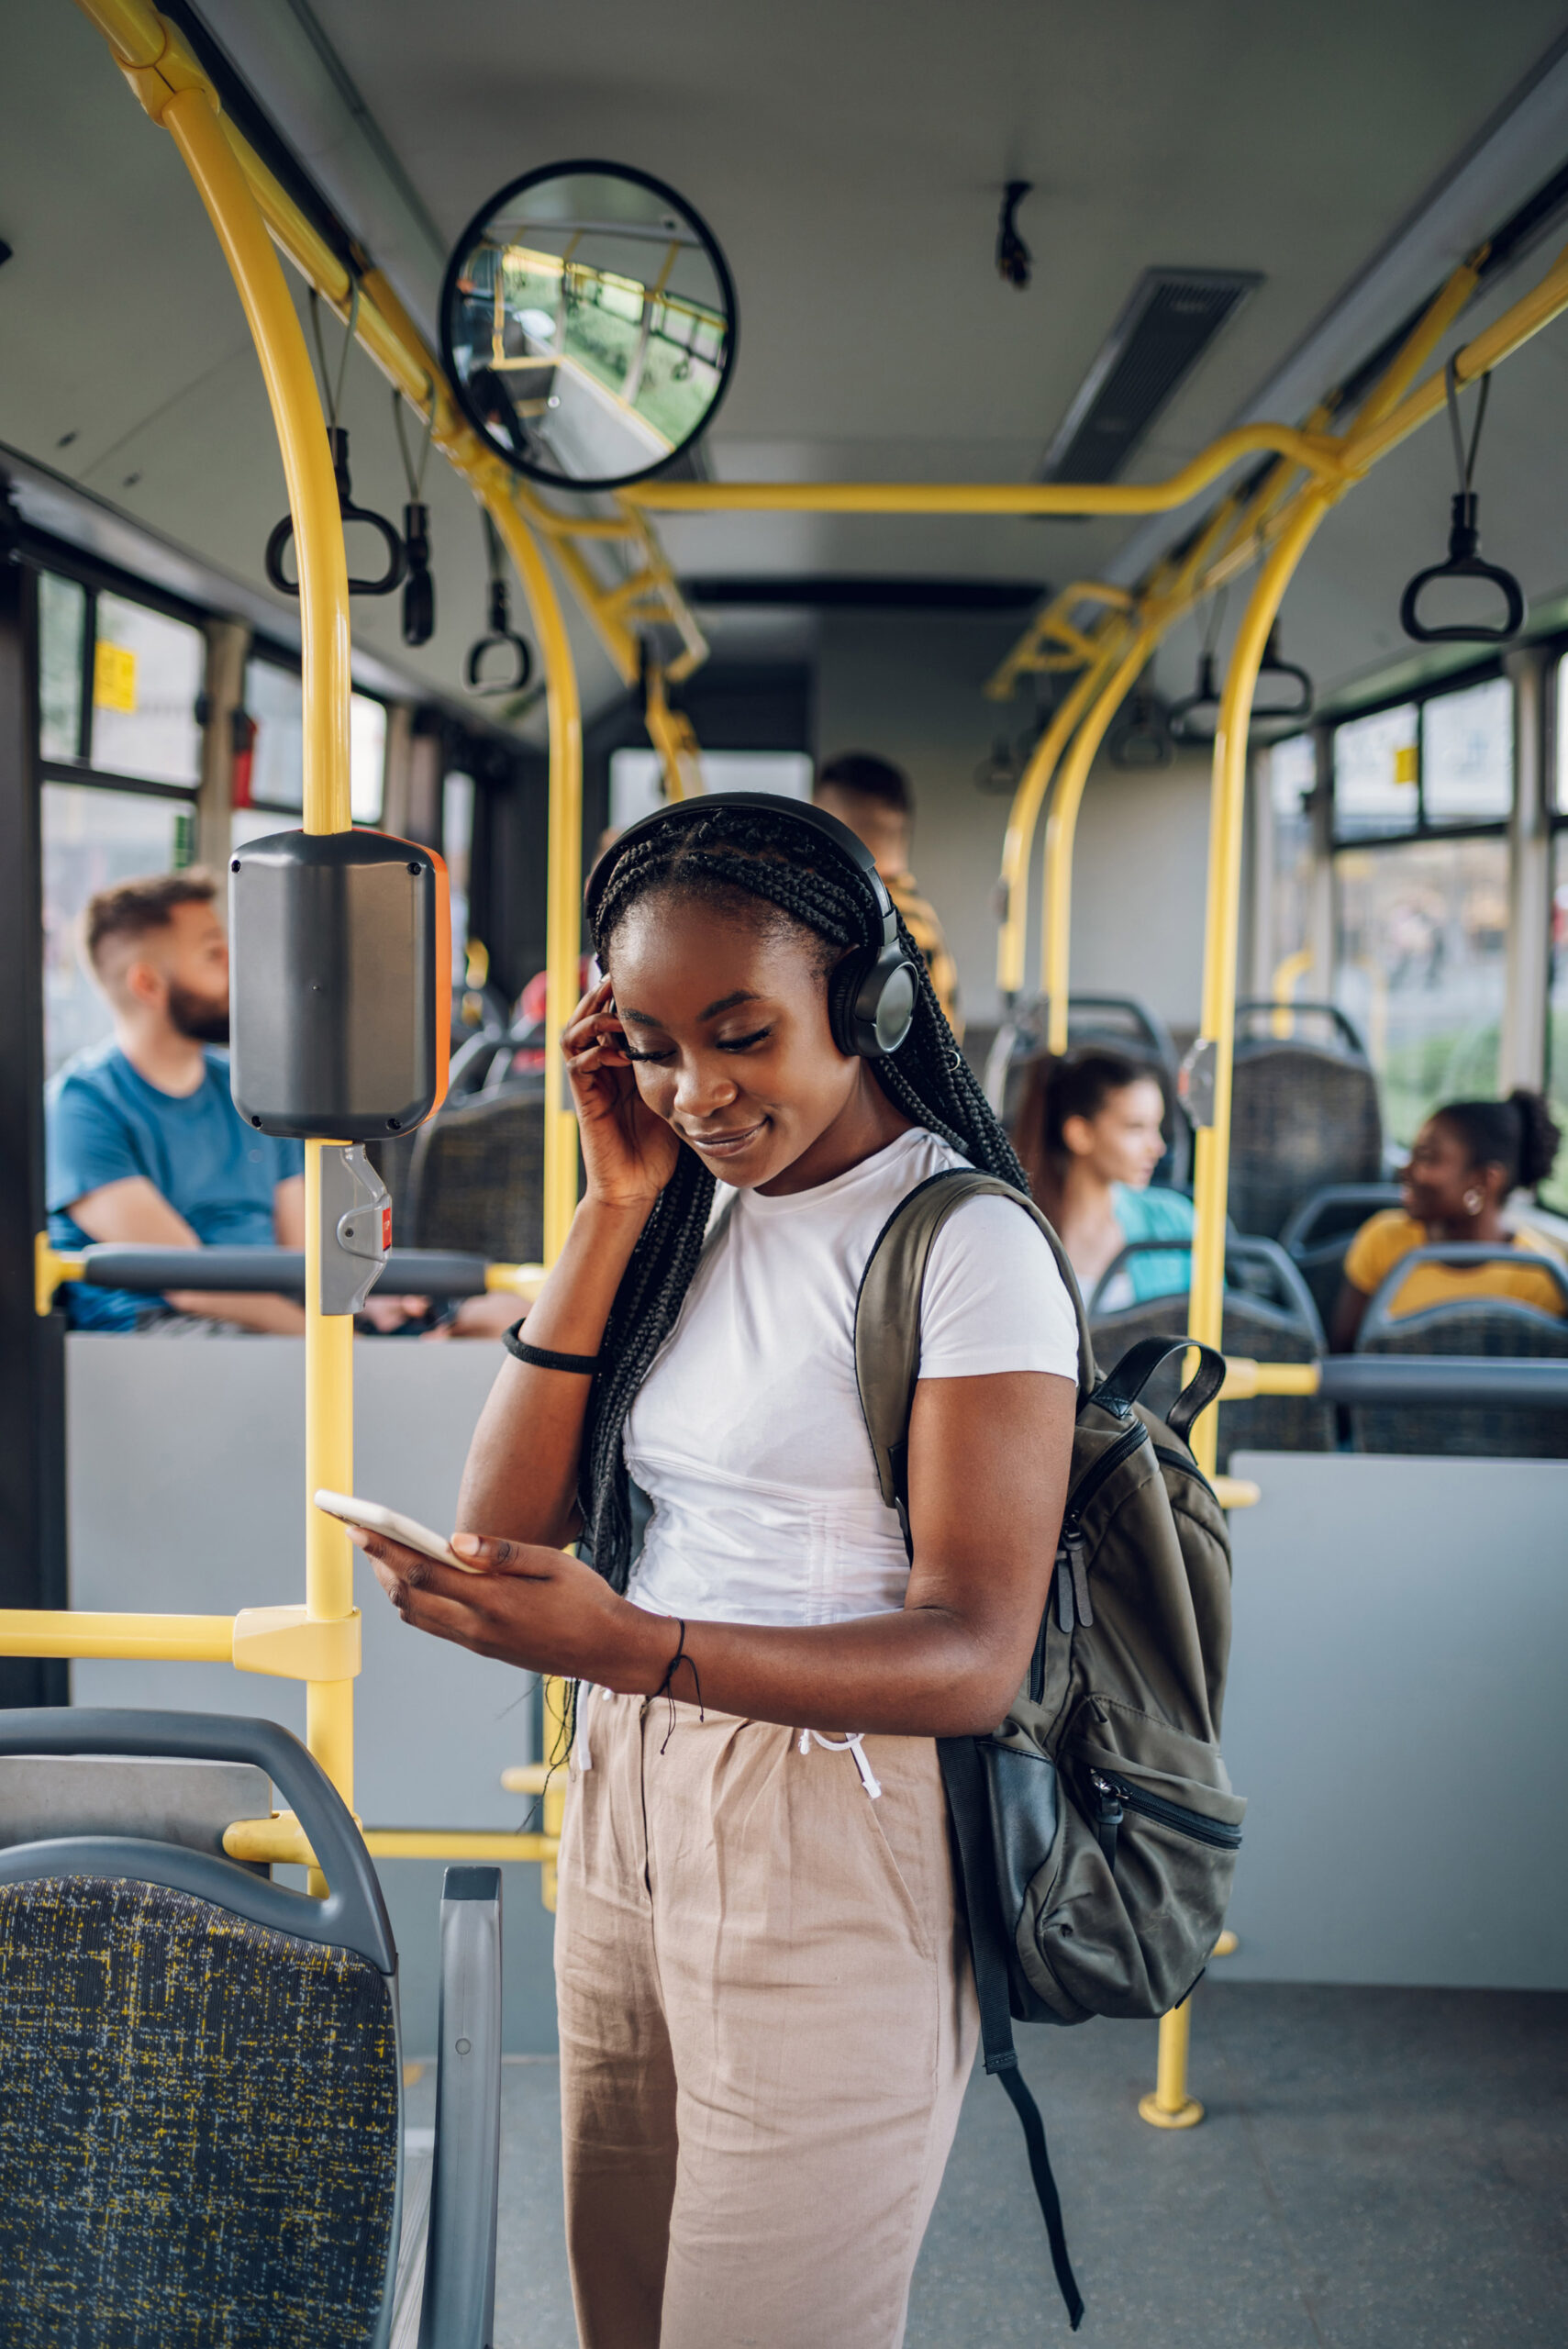 African american woman using smartphone while riding a bus